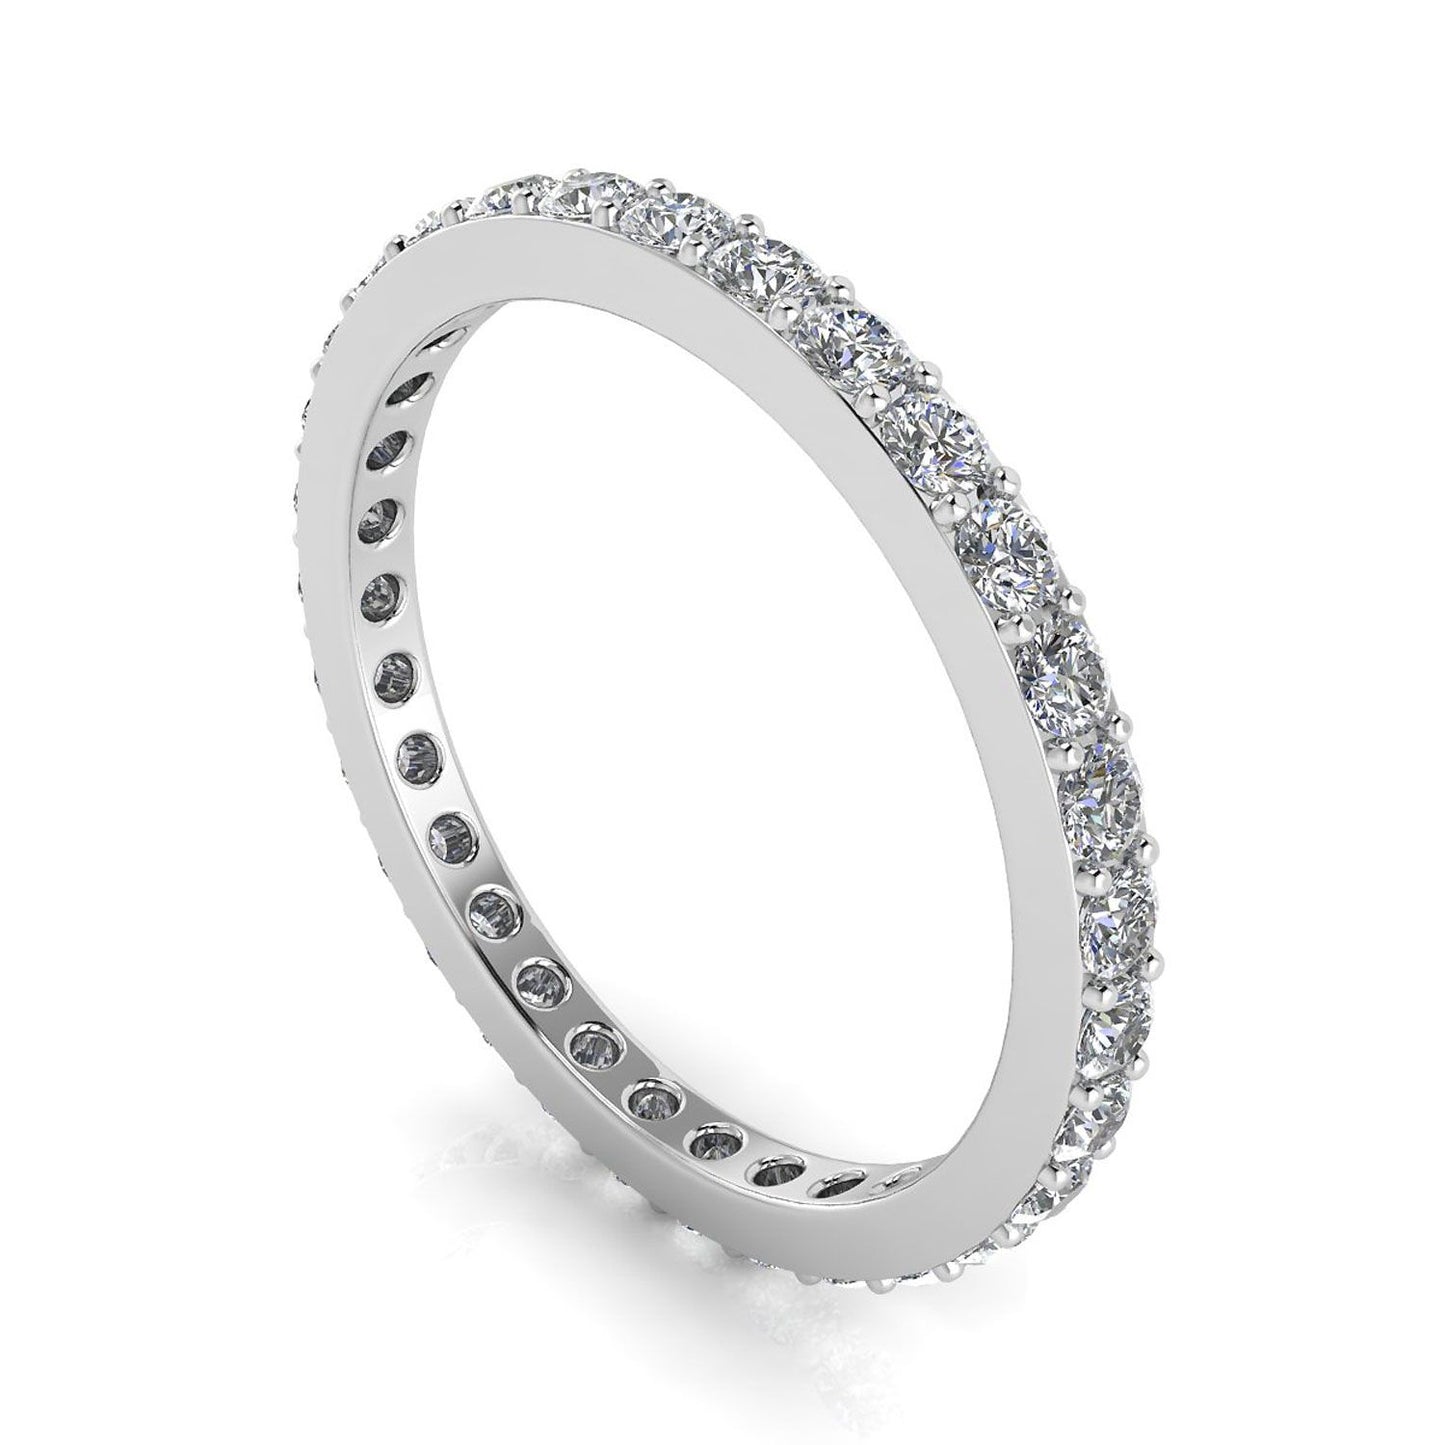 Round Brilliant Cut Diamond Pave Set Eternity Ring In 18k White Gold  (0.51ct. Tw.) Ring Size 8.5